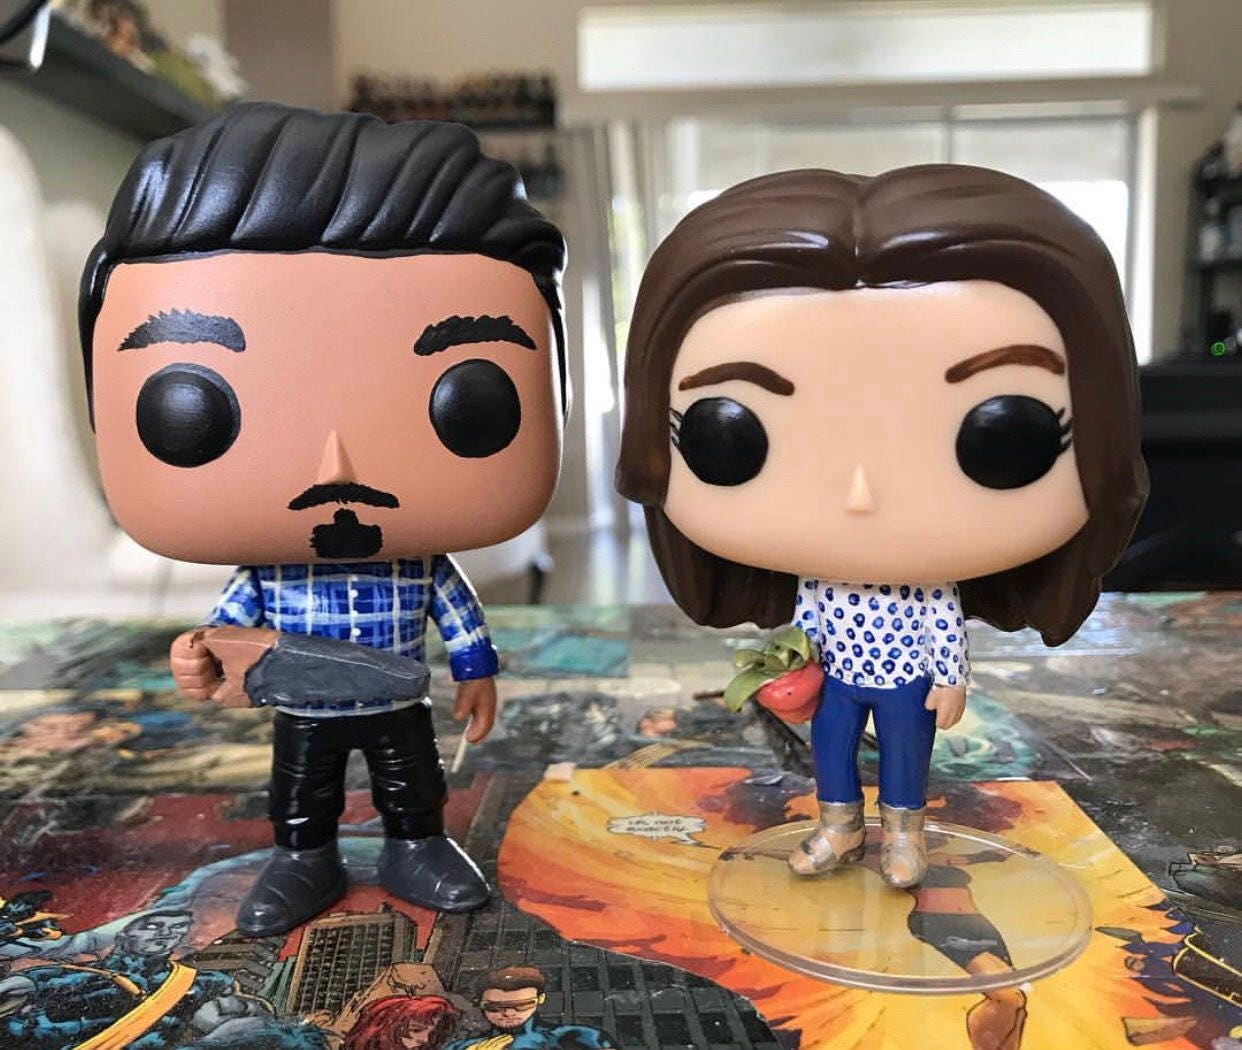 Custom Funko Pop set Paint and Clay Modeling 2 POPS INCLUDED